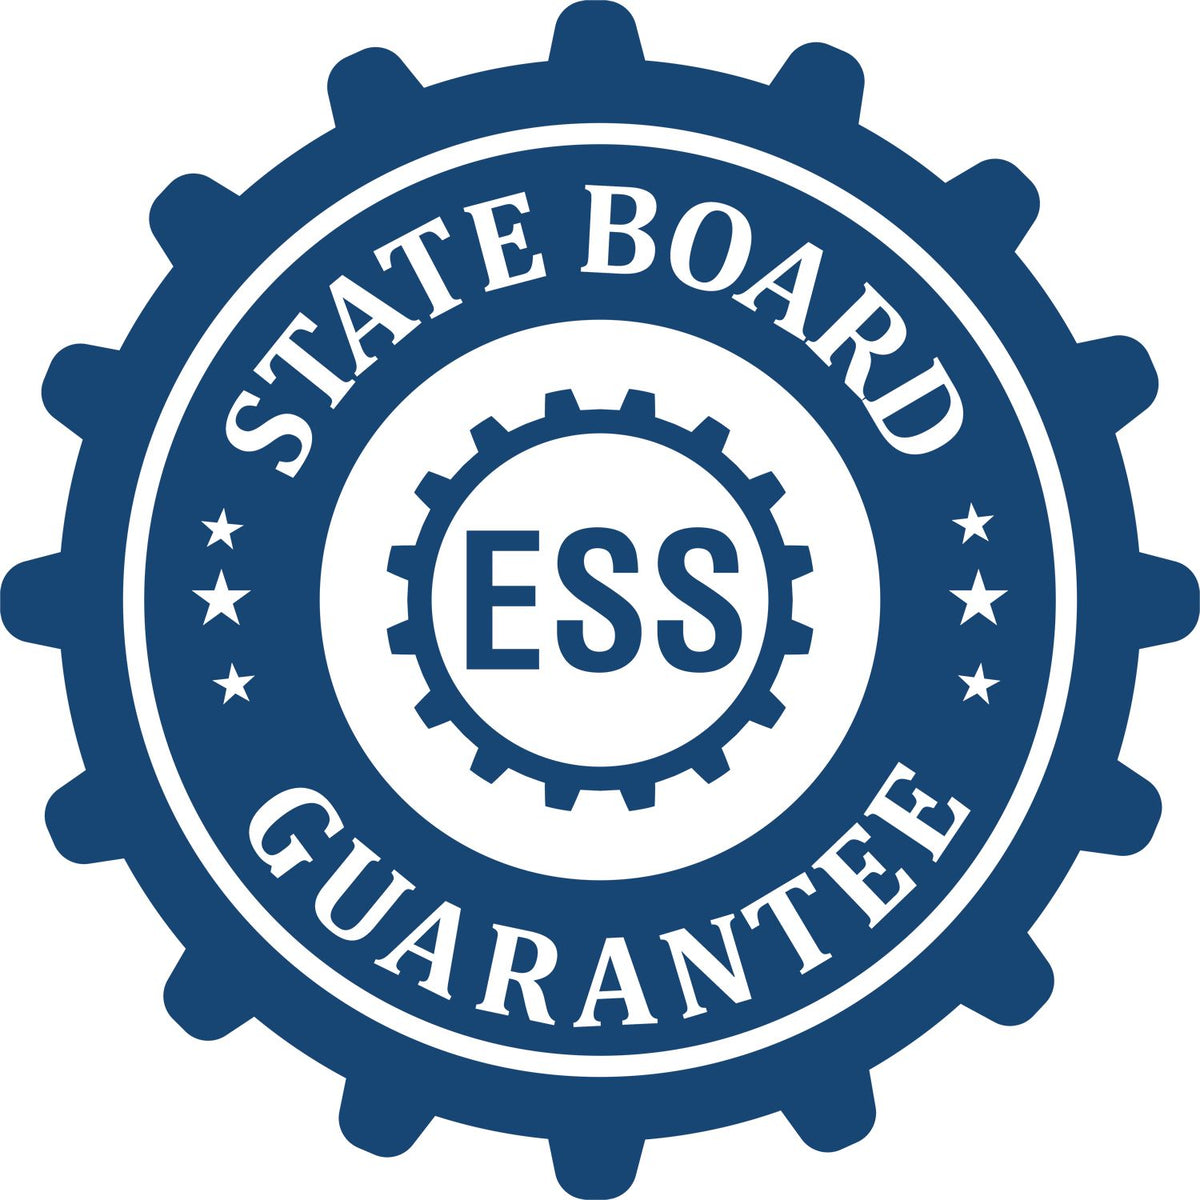 An emblem in a gear shape illustrating a state board guarantee for the Kentucky Landscape Architectural Seal Stamp product.